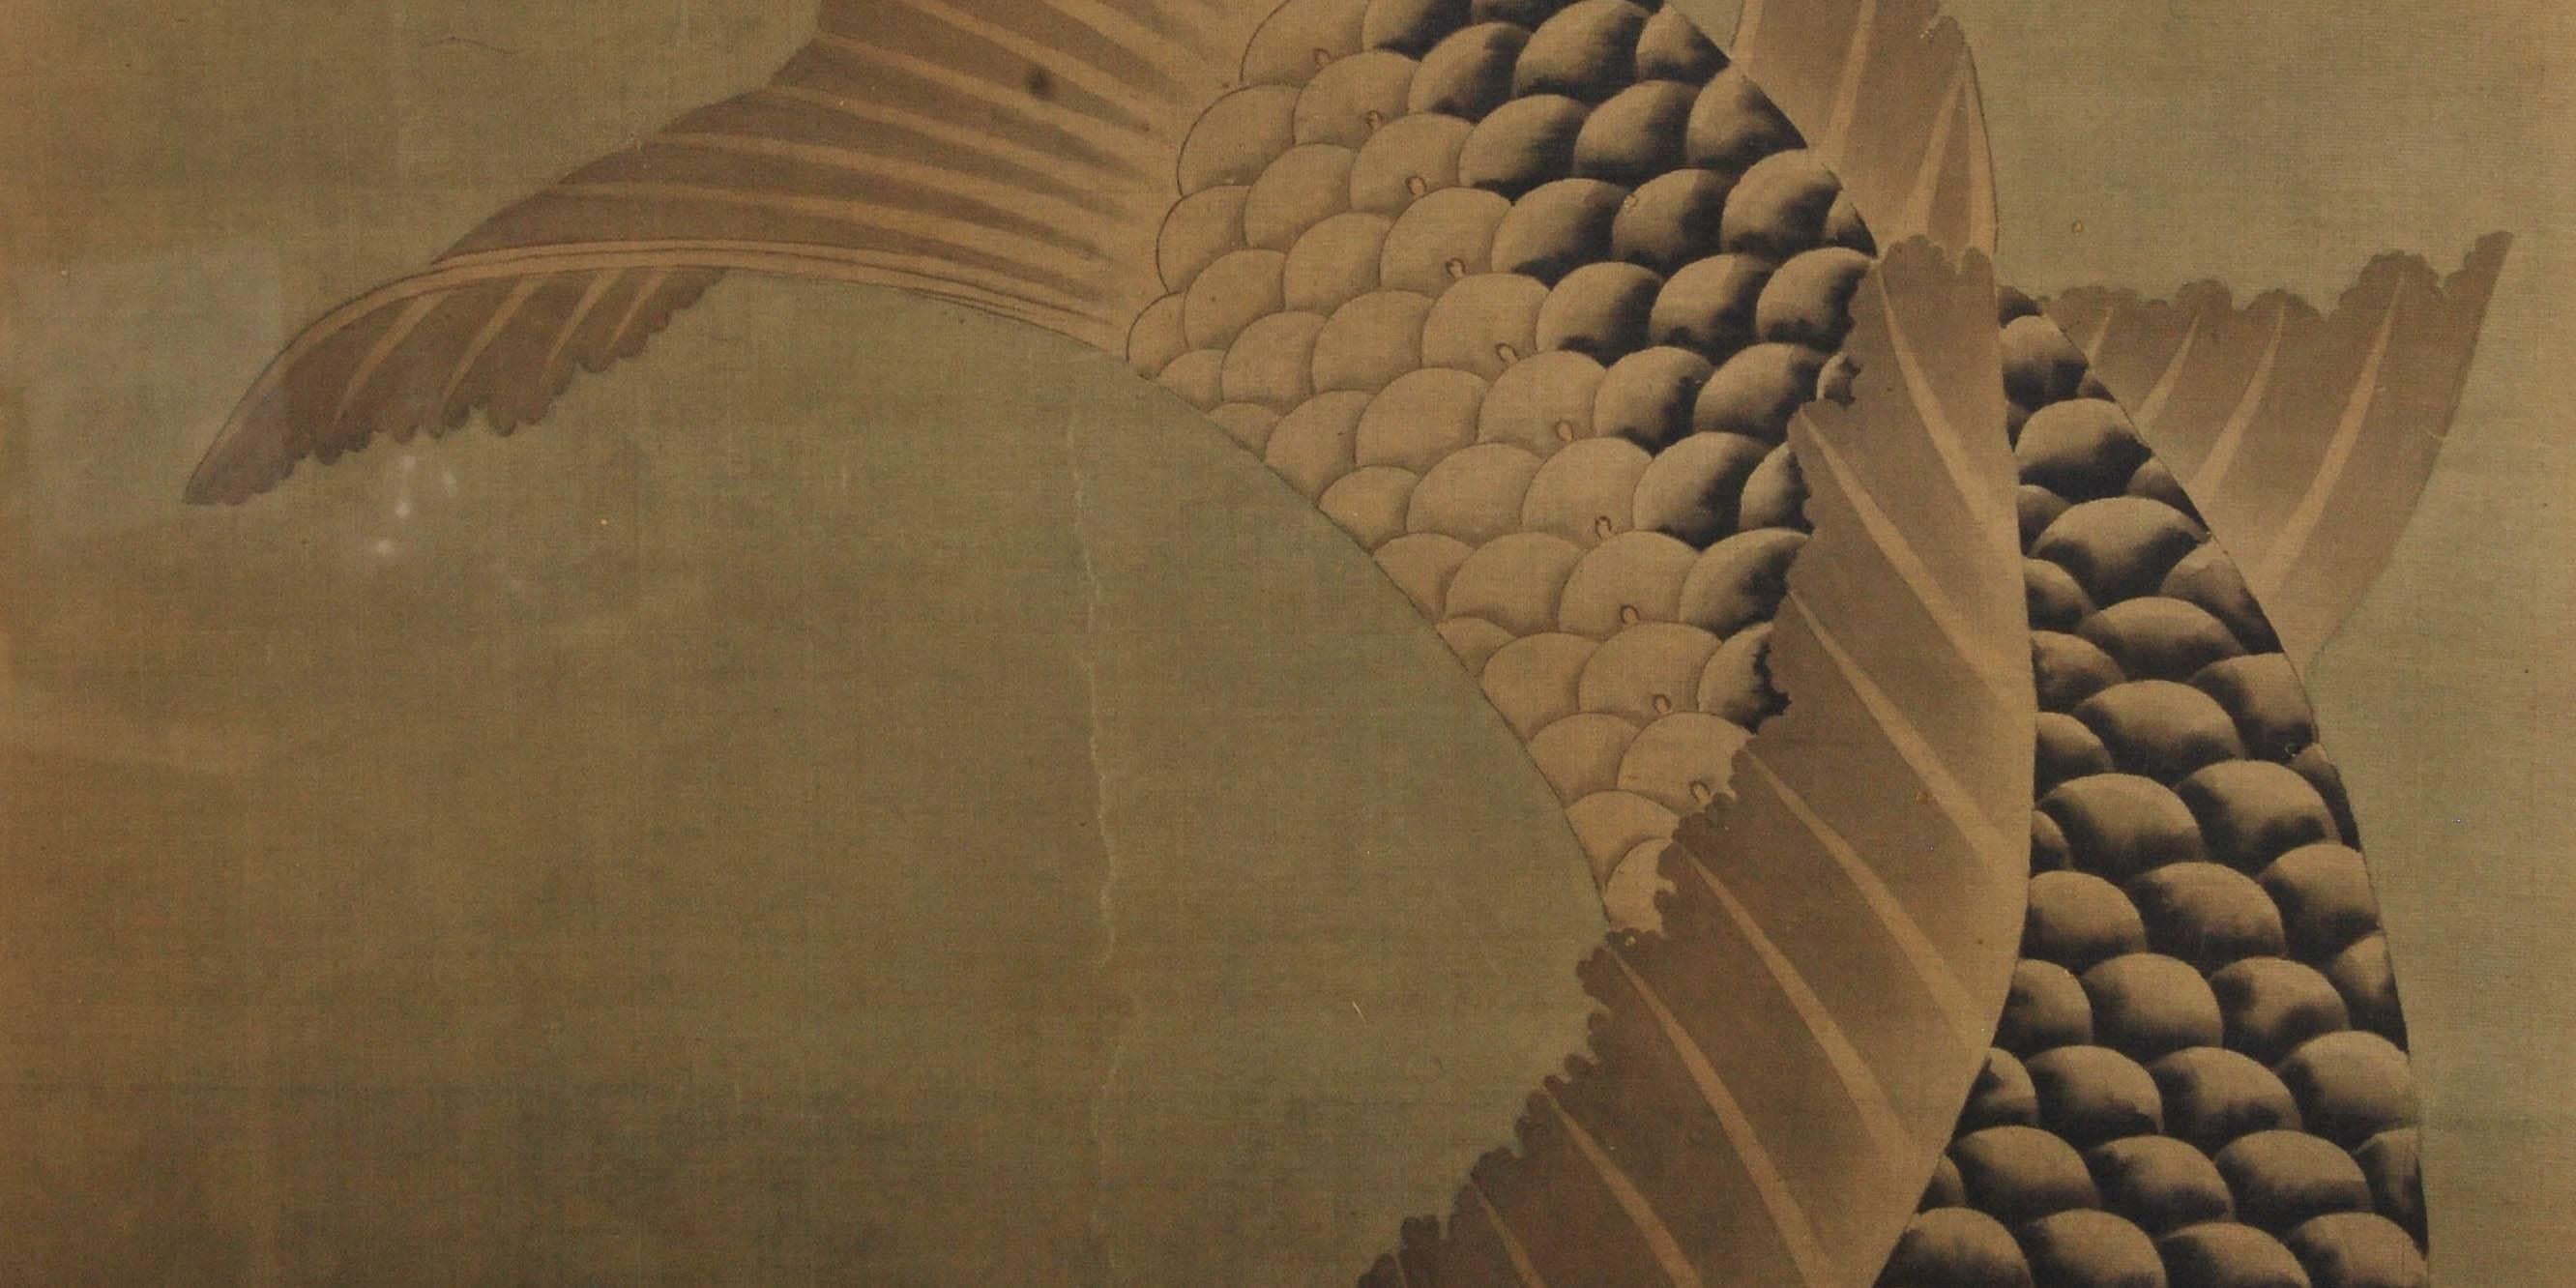 Japanese painting of a carp realistically rendered in an animated and elegant pose, with artist's seal to lower left corner, Edo period, early 19th century.

Materials: Ink and color on silk.

Dimensions: H 109.5cm x W 55cm (framed.)